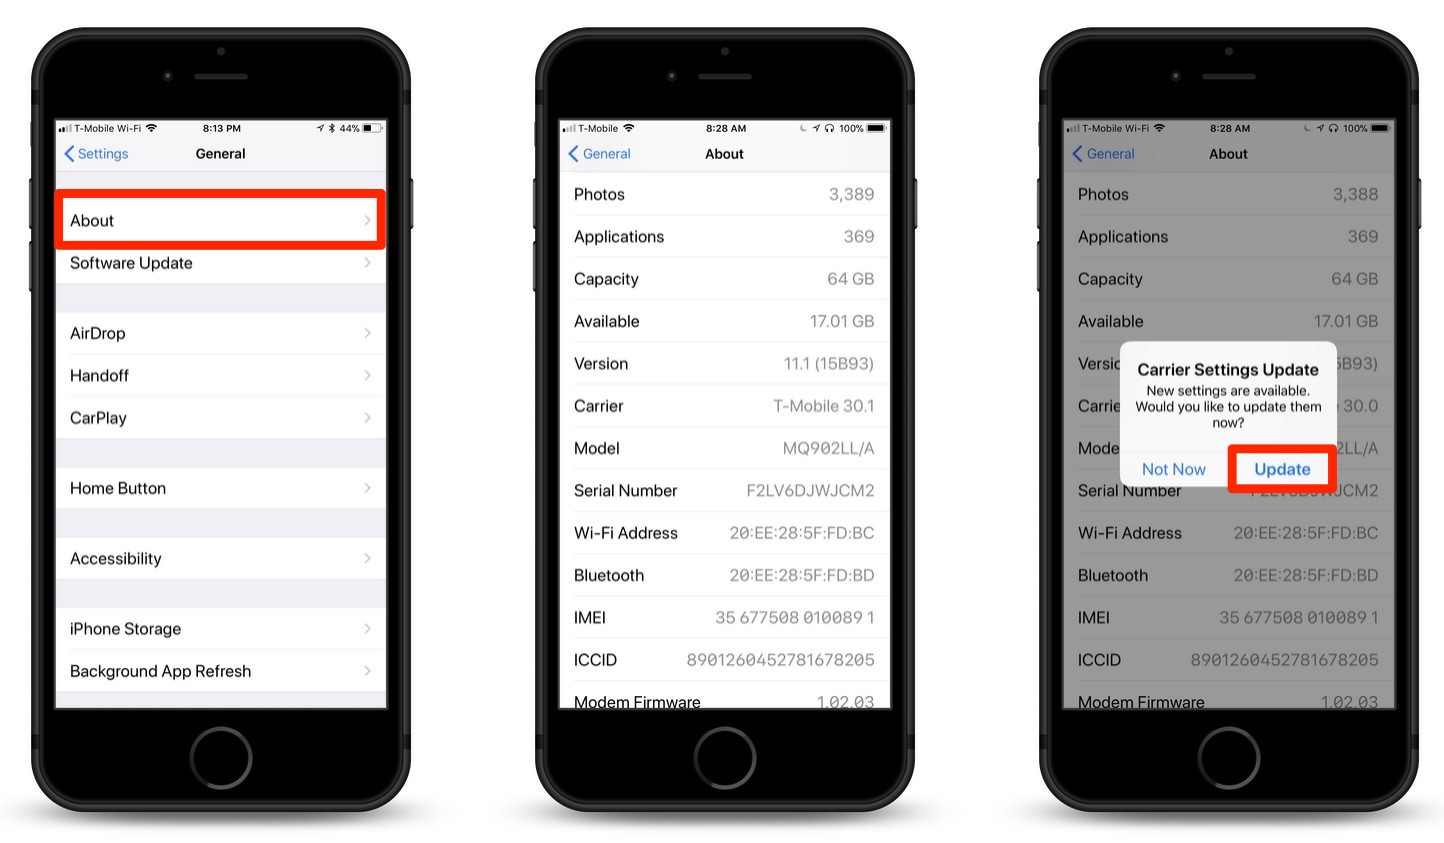 How To Manually Update Your Carrier Settings on Your iPhone